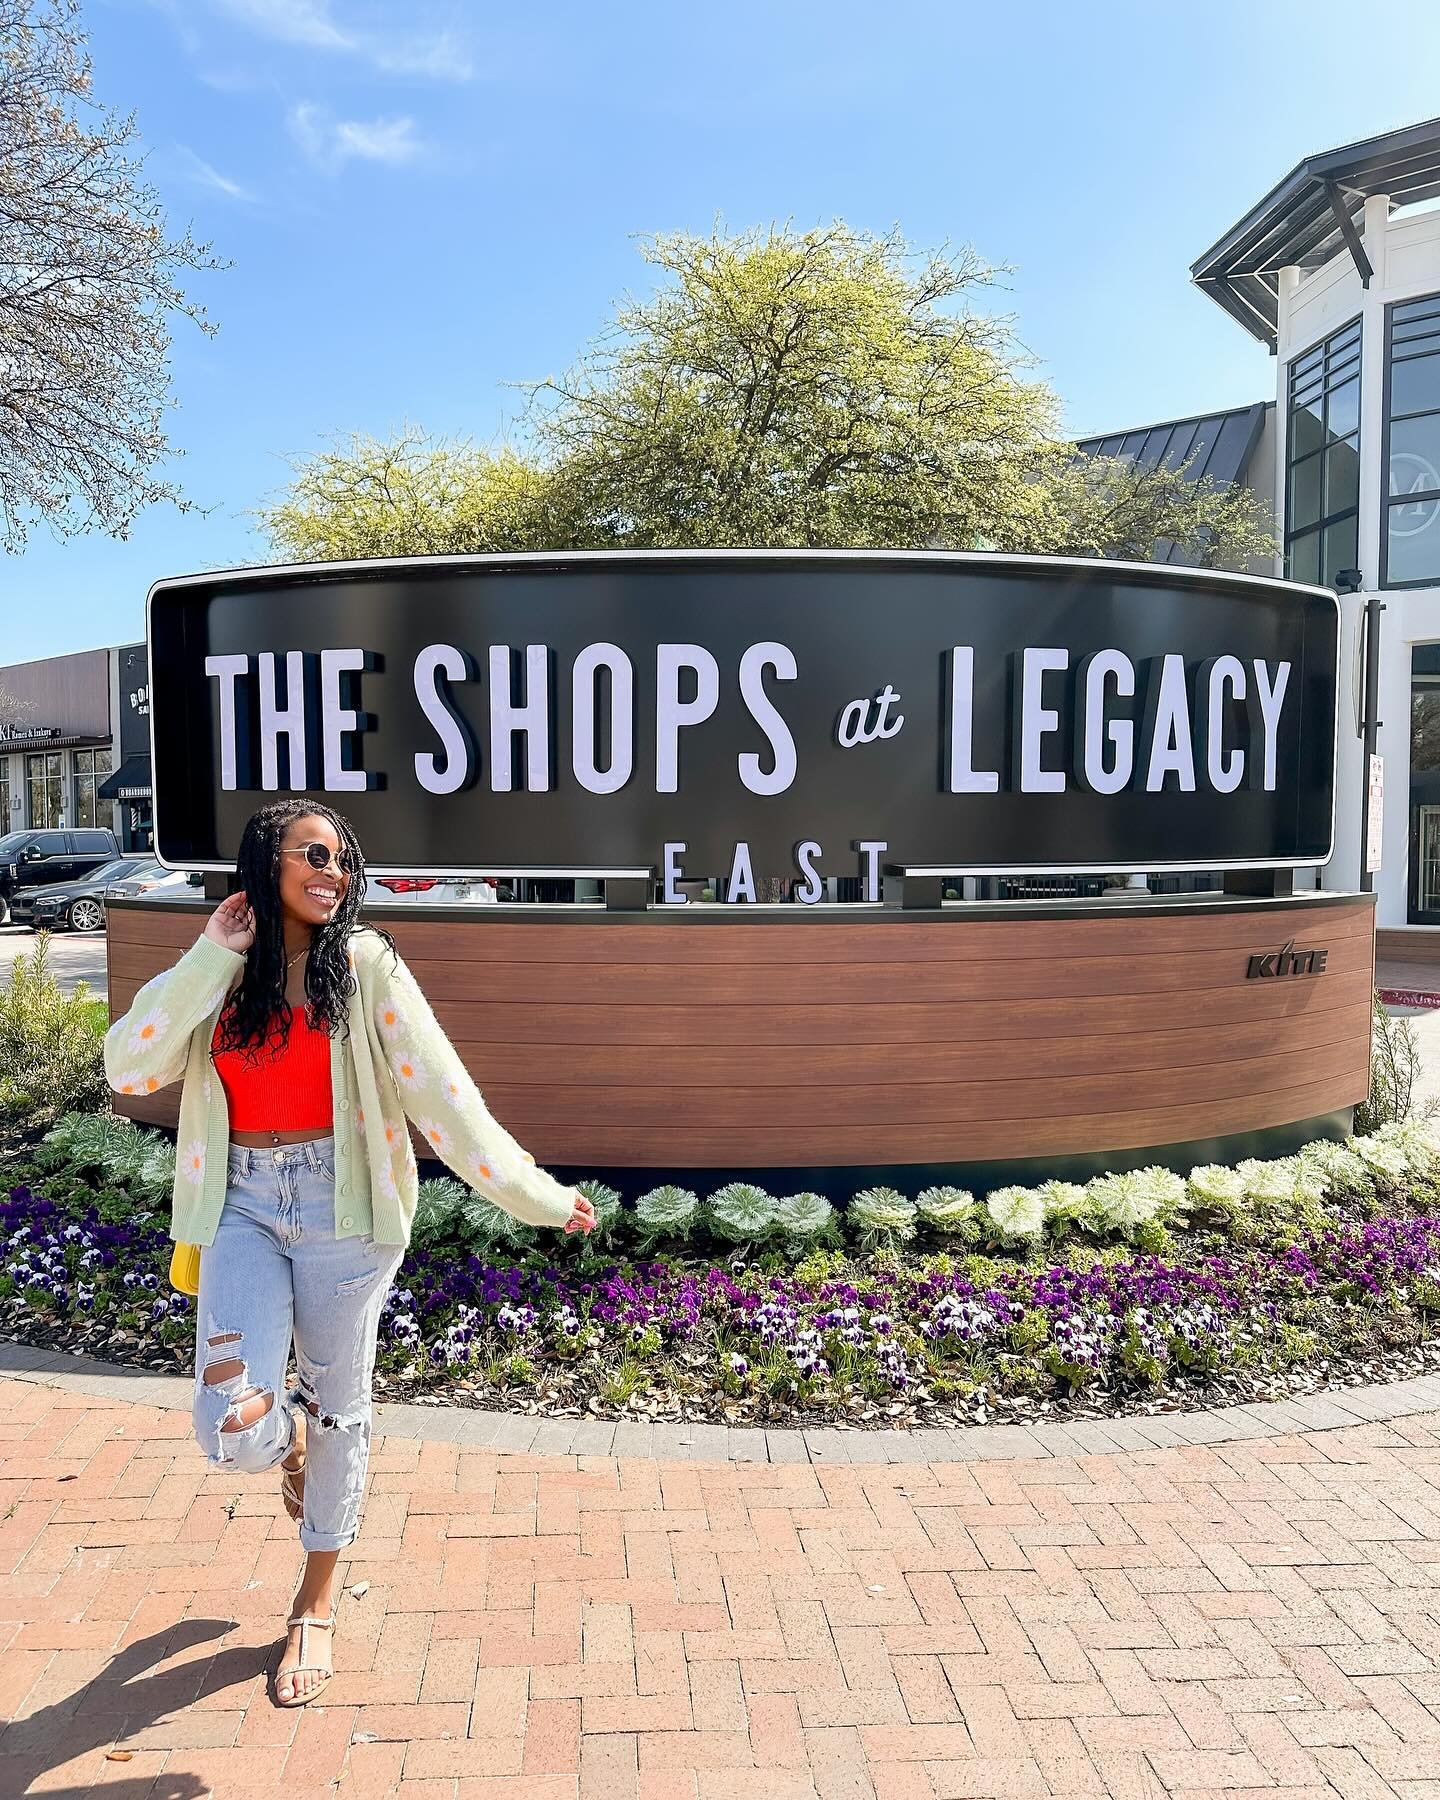 Happy Earth Day! 🌎 ❤️ Spend the day outside at our beautiful property while you shop and dine! We love seeing you enjoying your time at The Shops at Legacy East, make sure to tag us in your photo next time you&rsquo;re here! 📸: @stephiexxo, @doodle